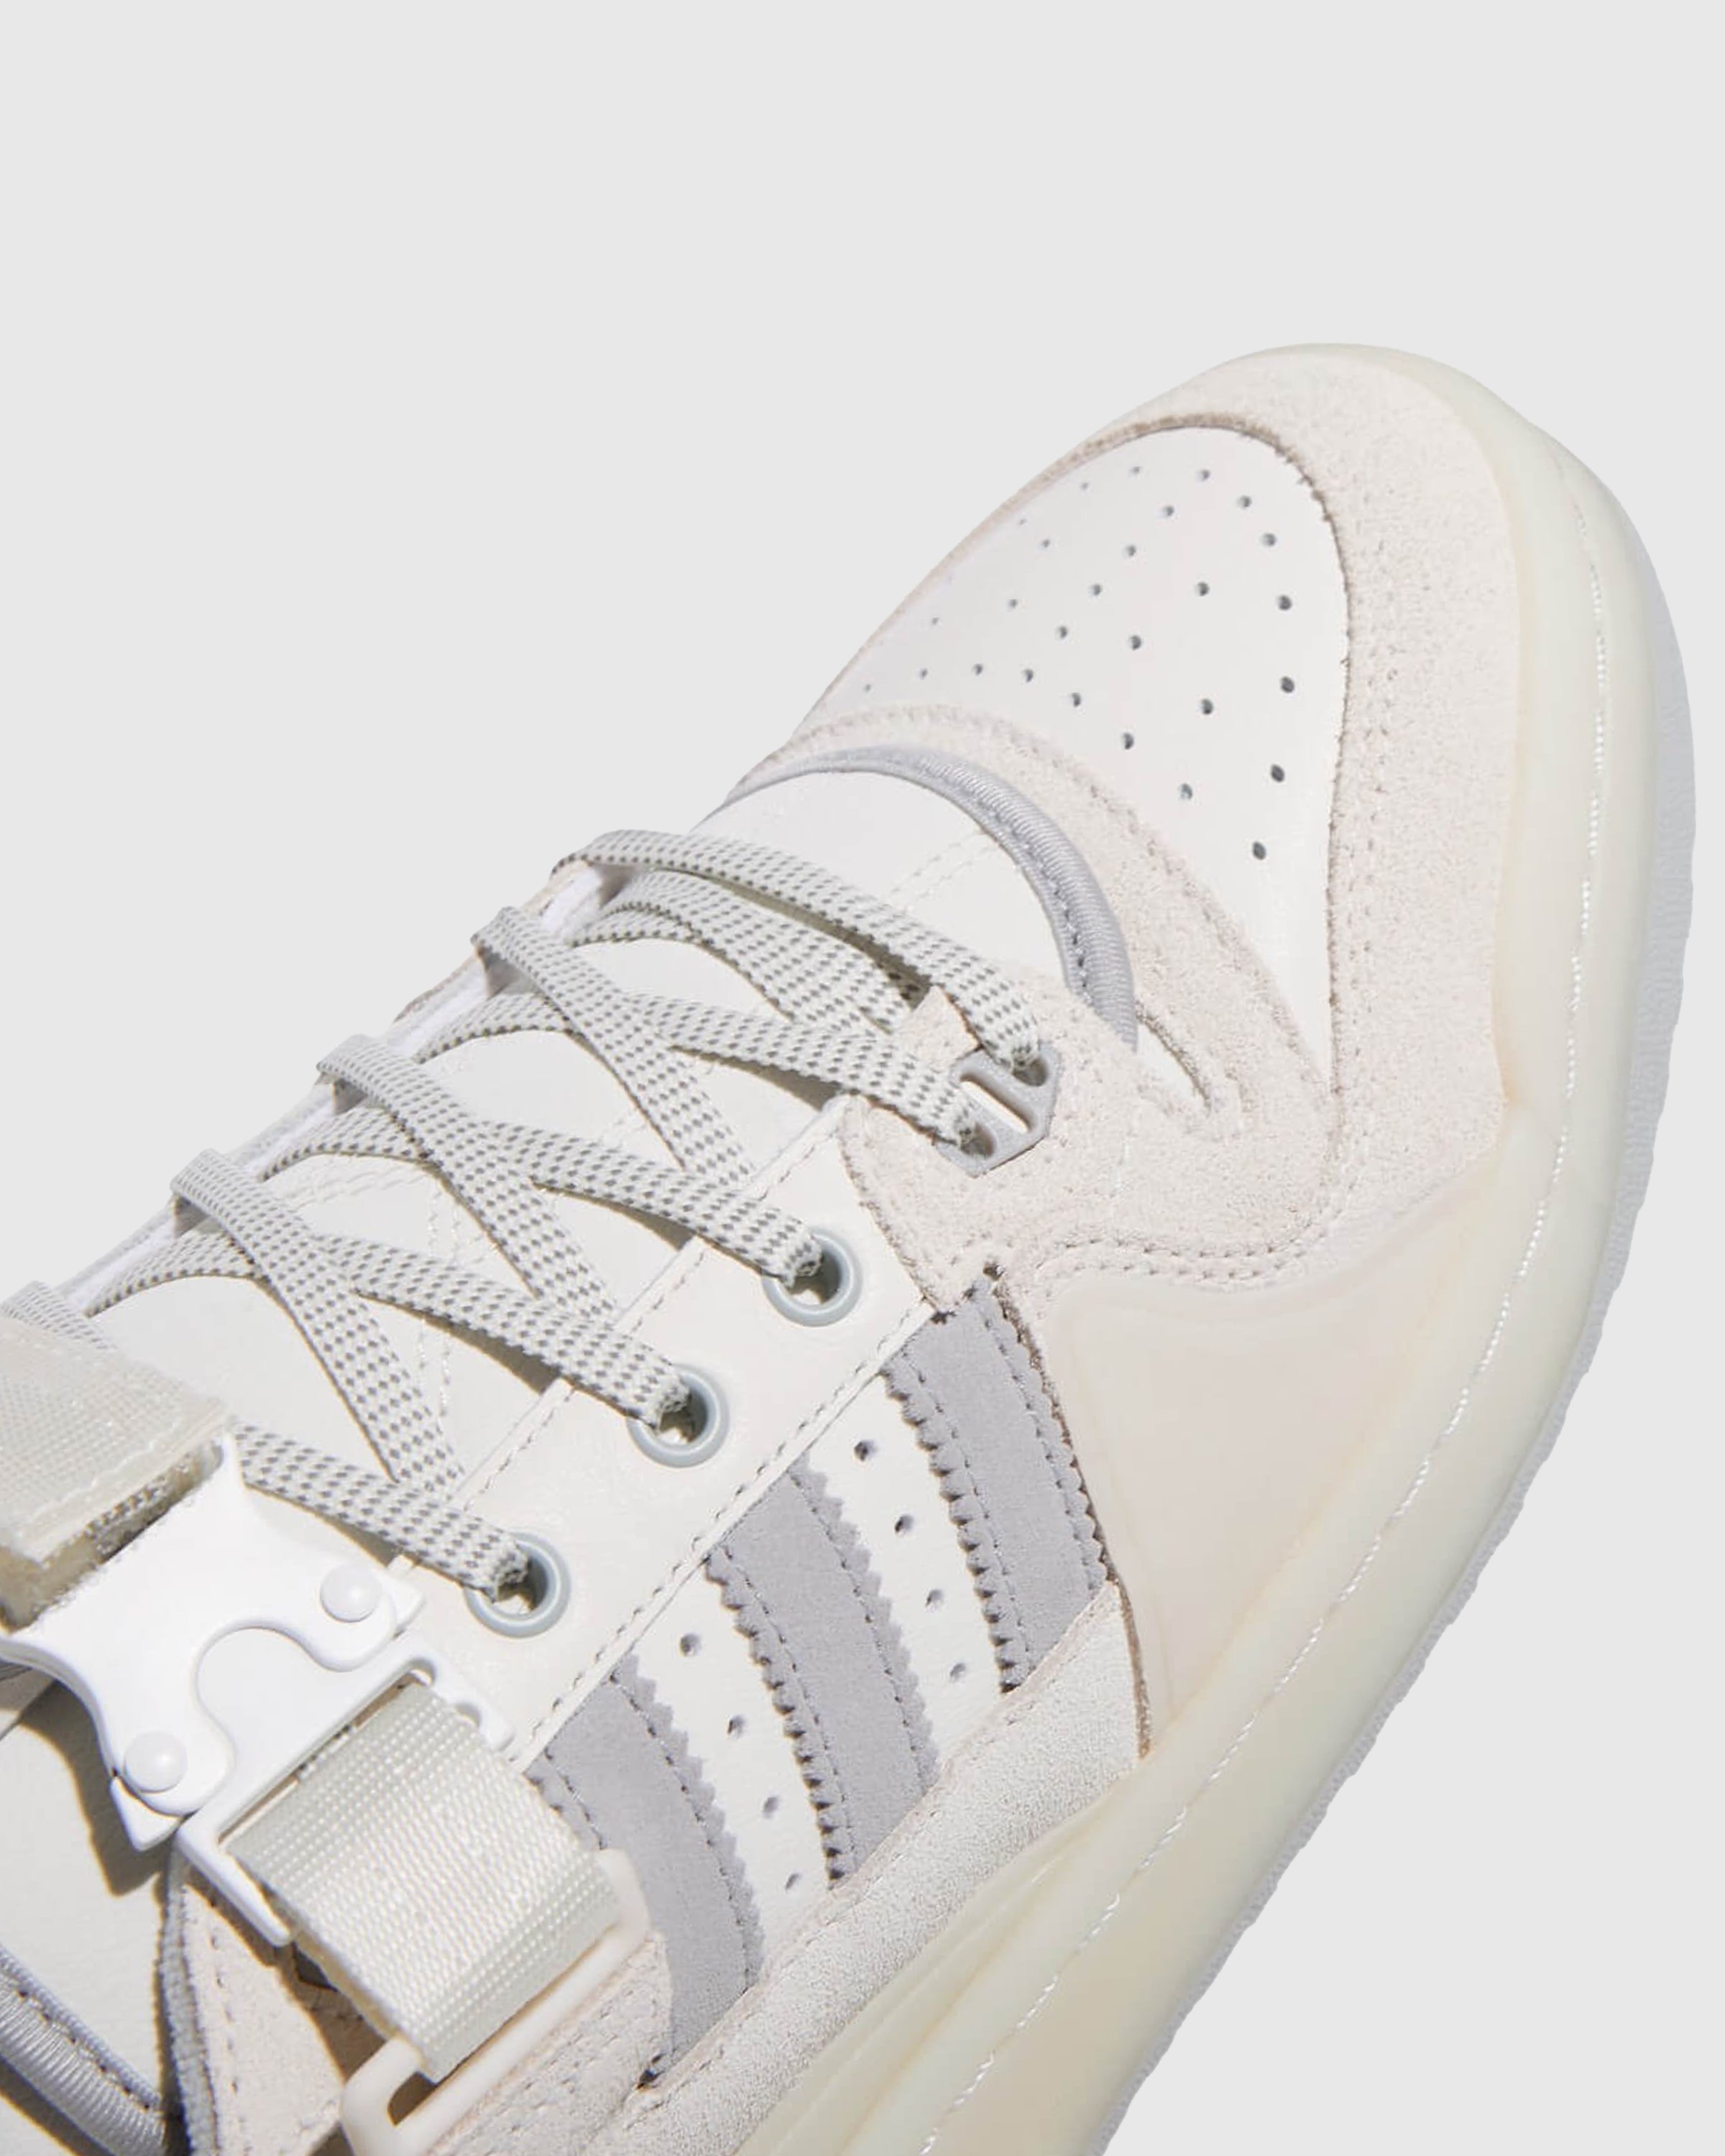 Adidas x Bad Bunny - Forum Low Cloud White/Clear Onix/Chalk White - Footwear - White - Image 4